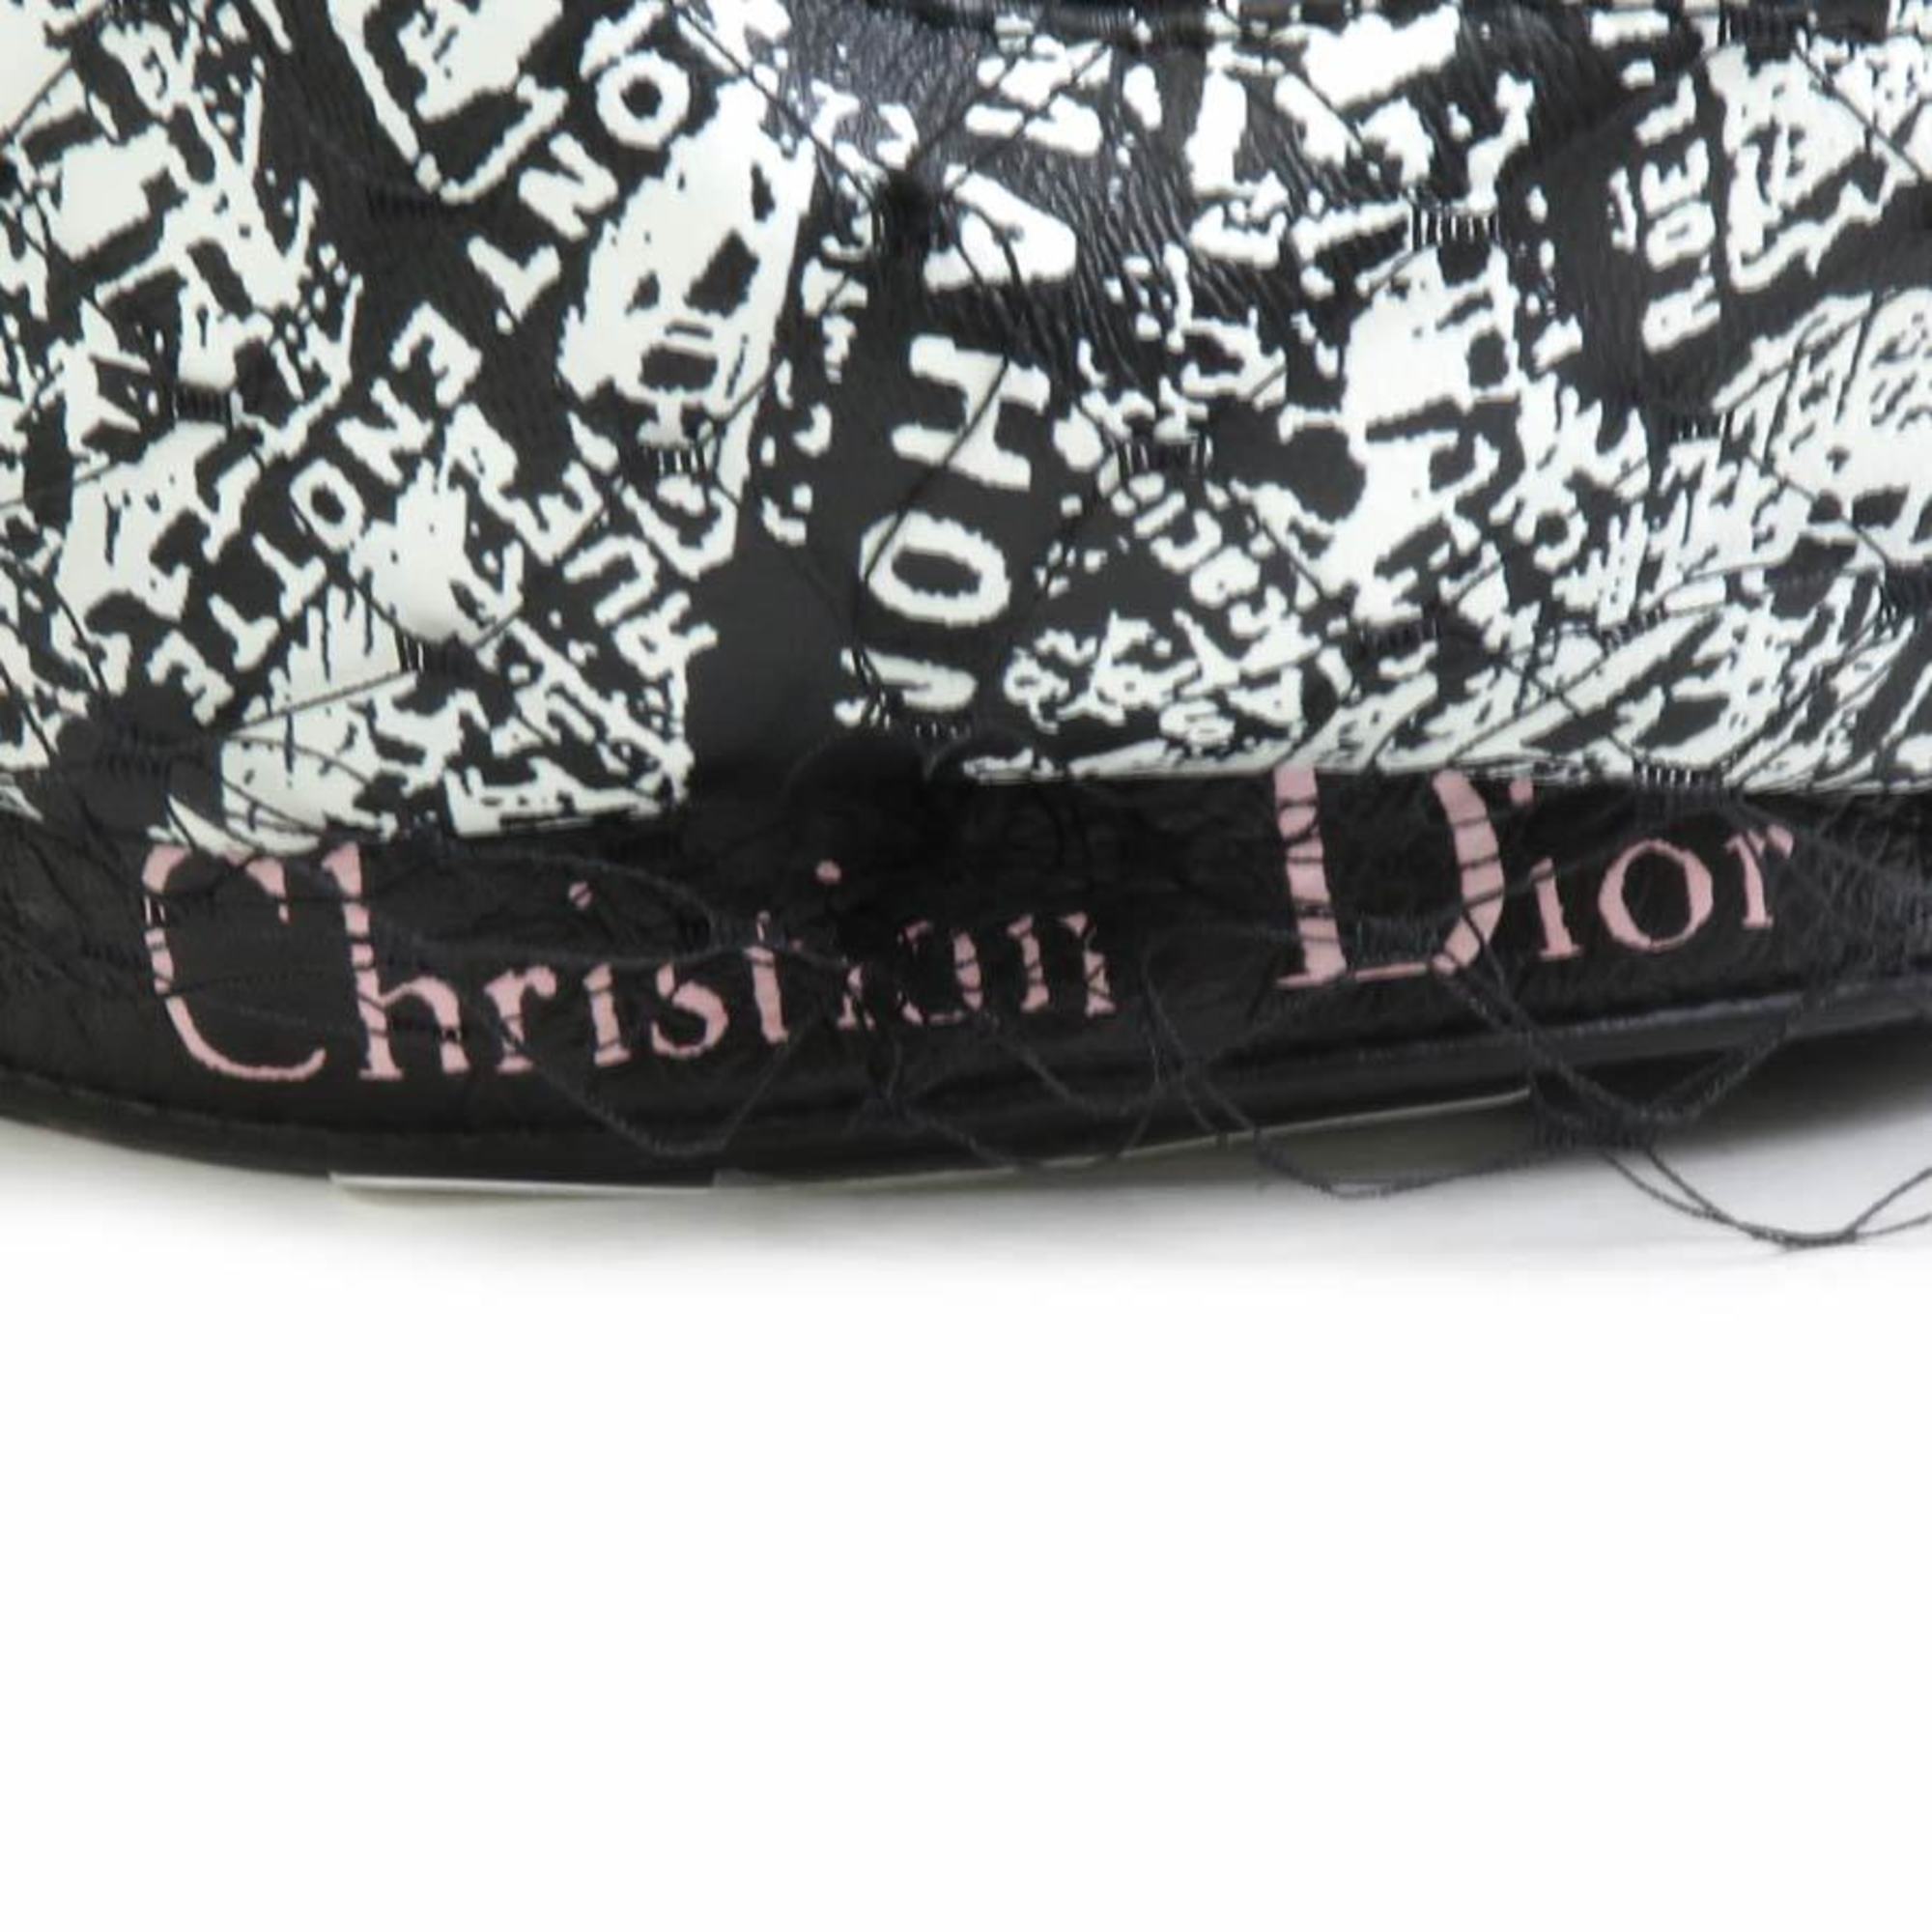 Christian Dior Leather Beret Black x Pink White Women's h30264f